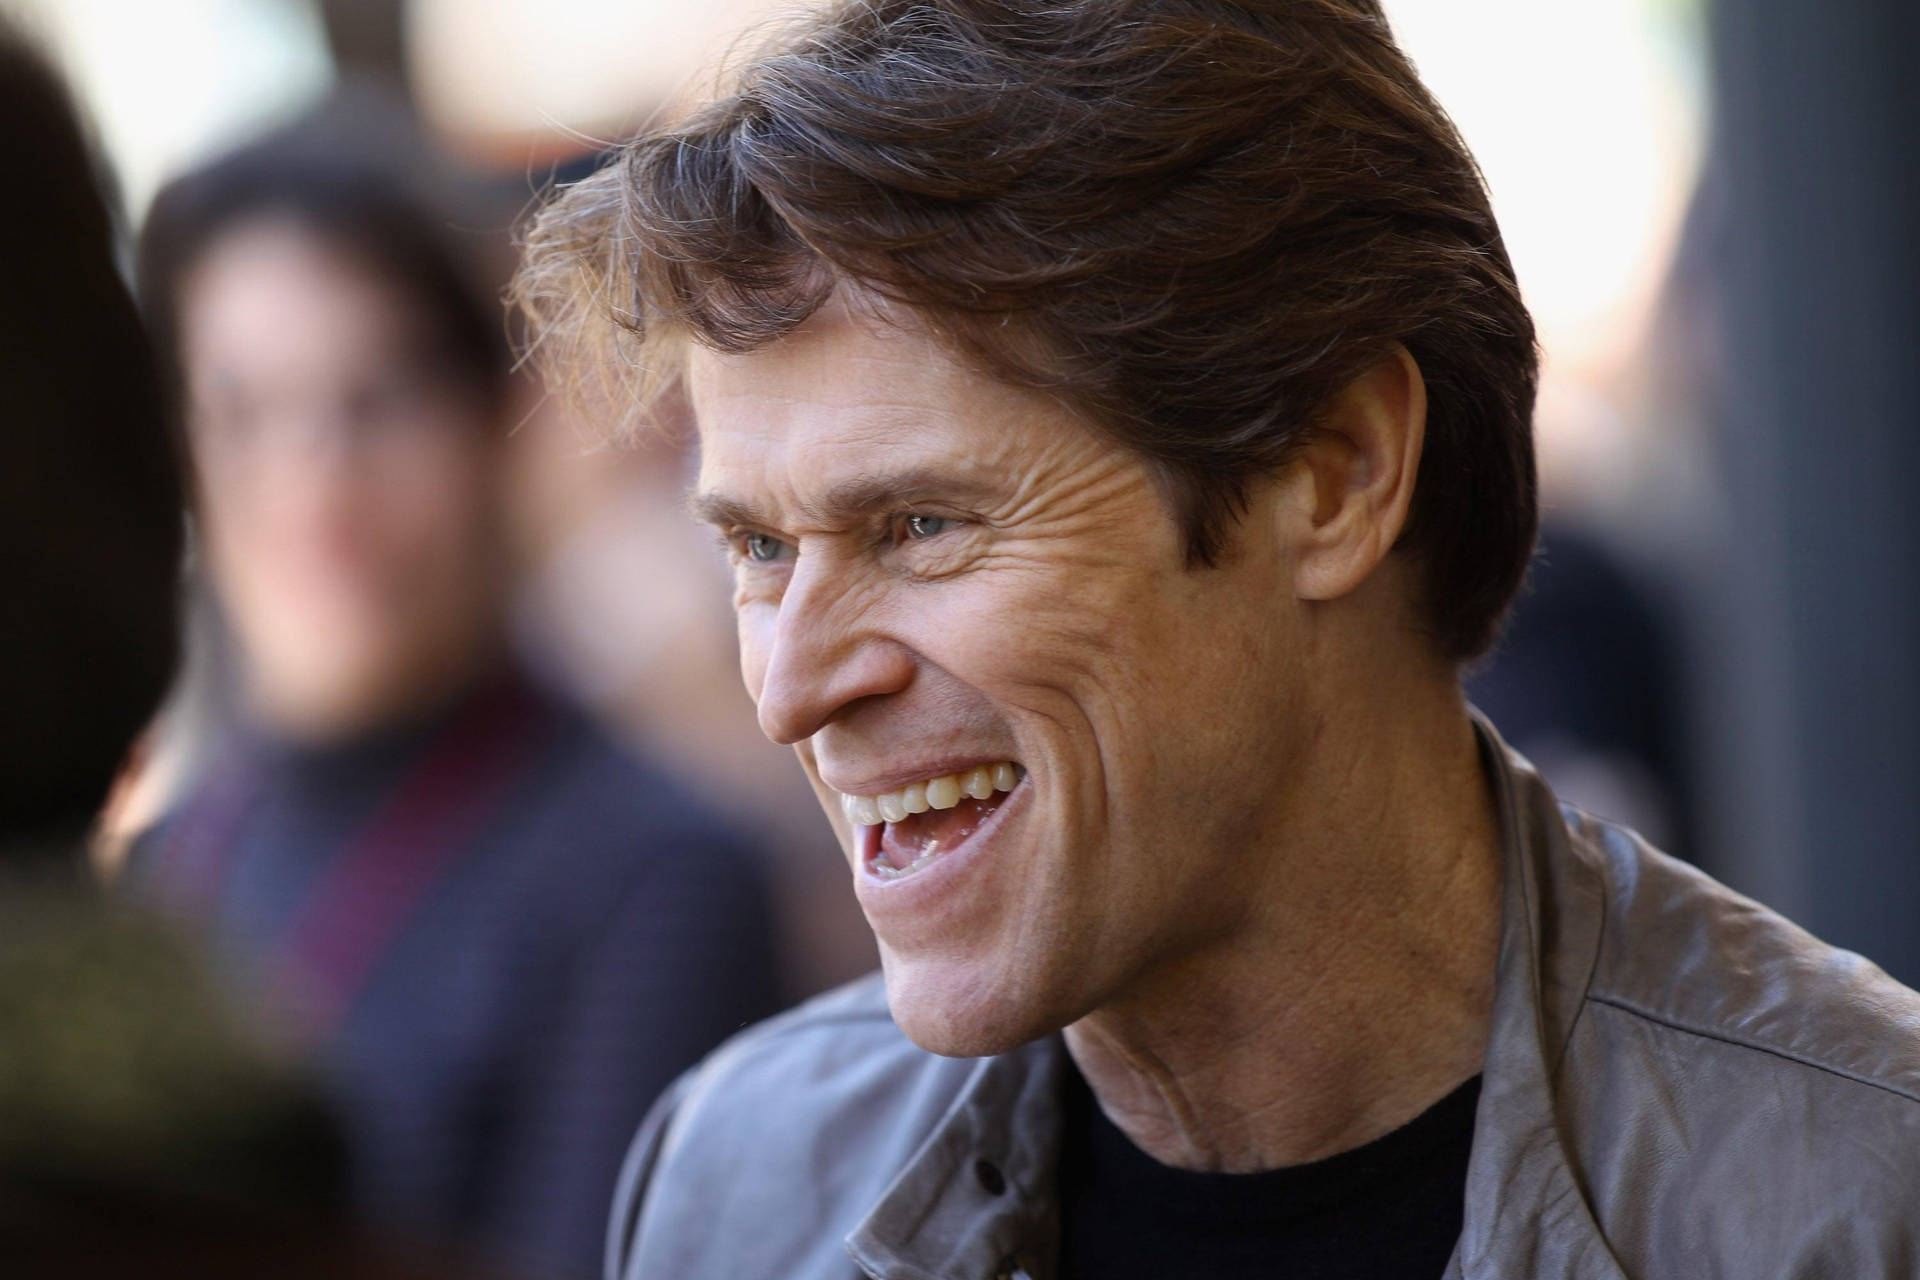 Award-Winning Actor Willem Dafoe in a captivating side profile view. Wallpaper